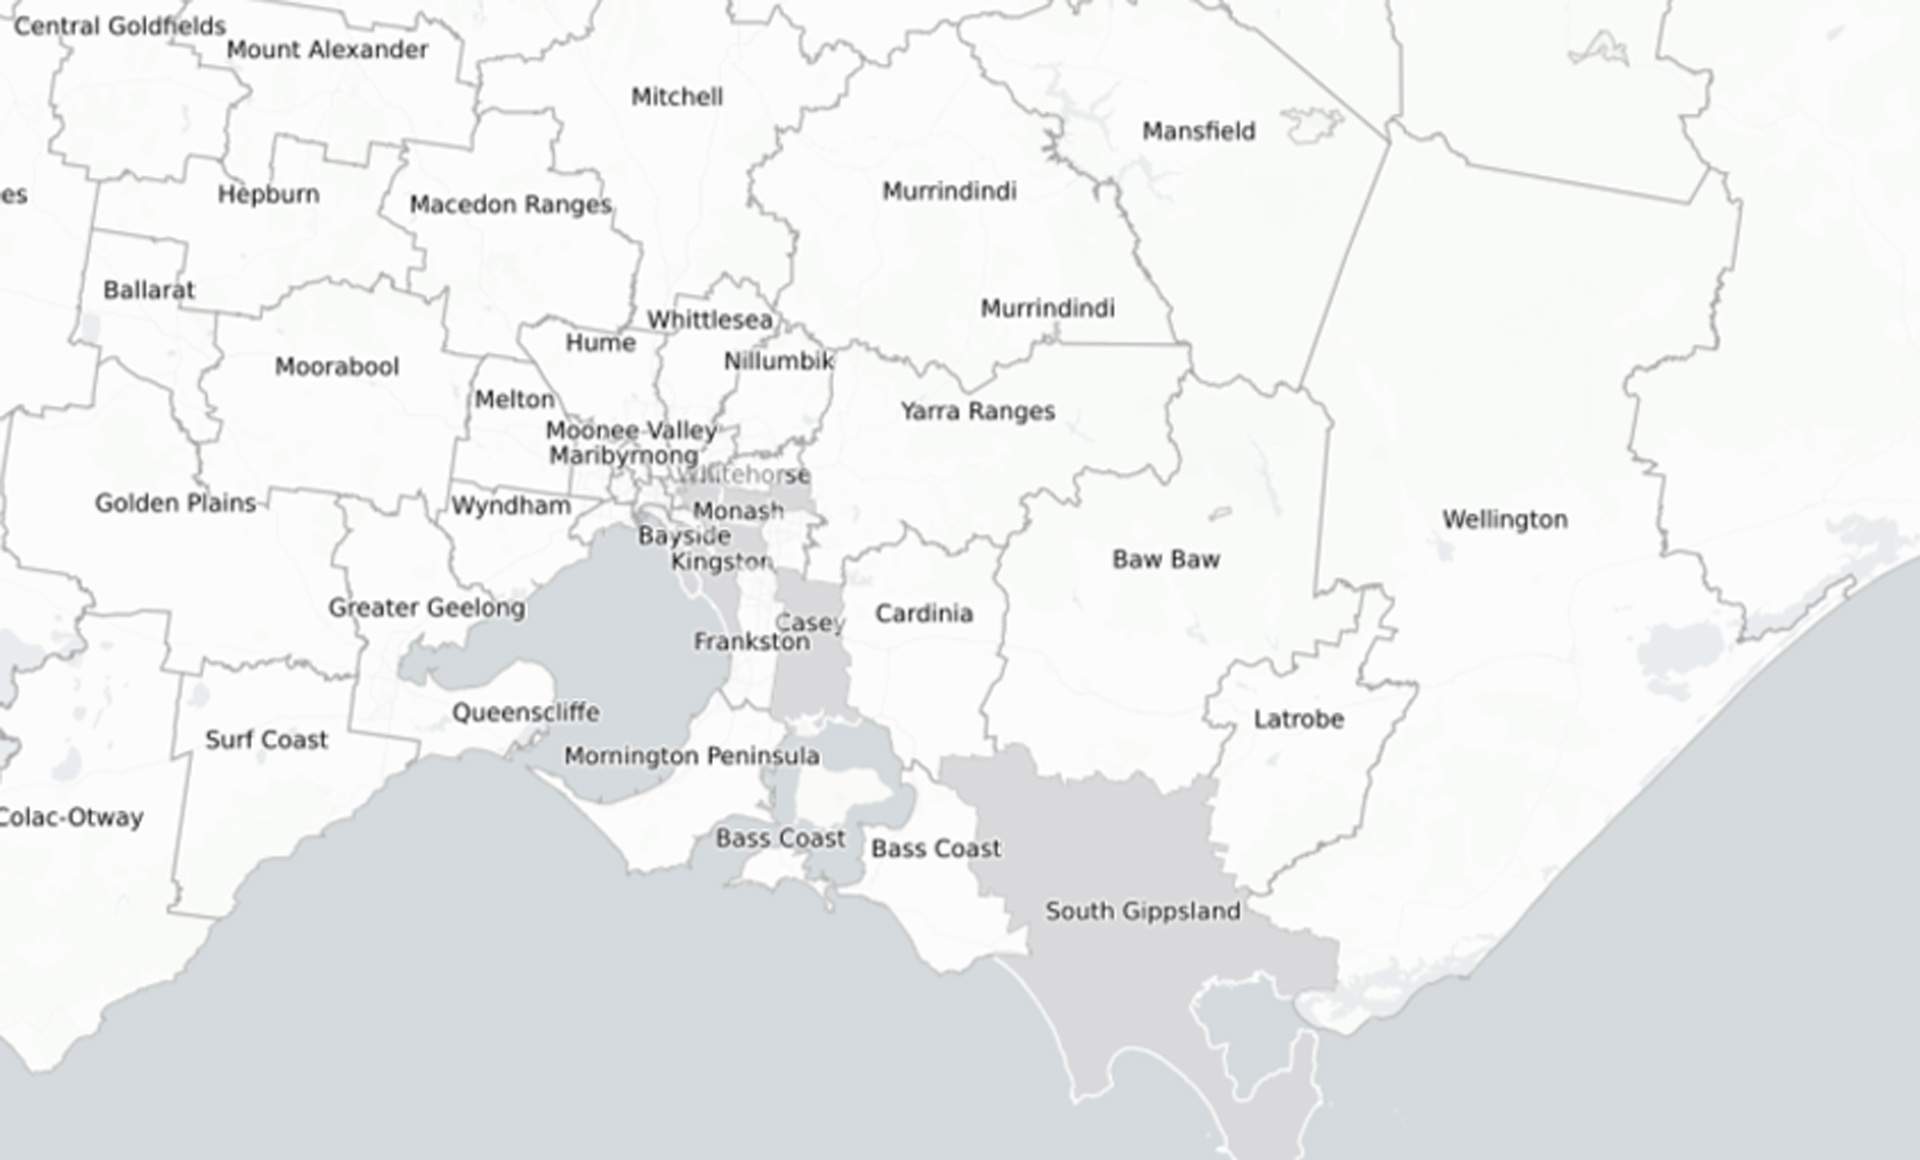 This Interactive Map Shows Victoria's COVID-19 Cases by Local Government Area and Postcode